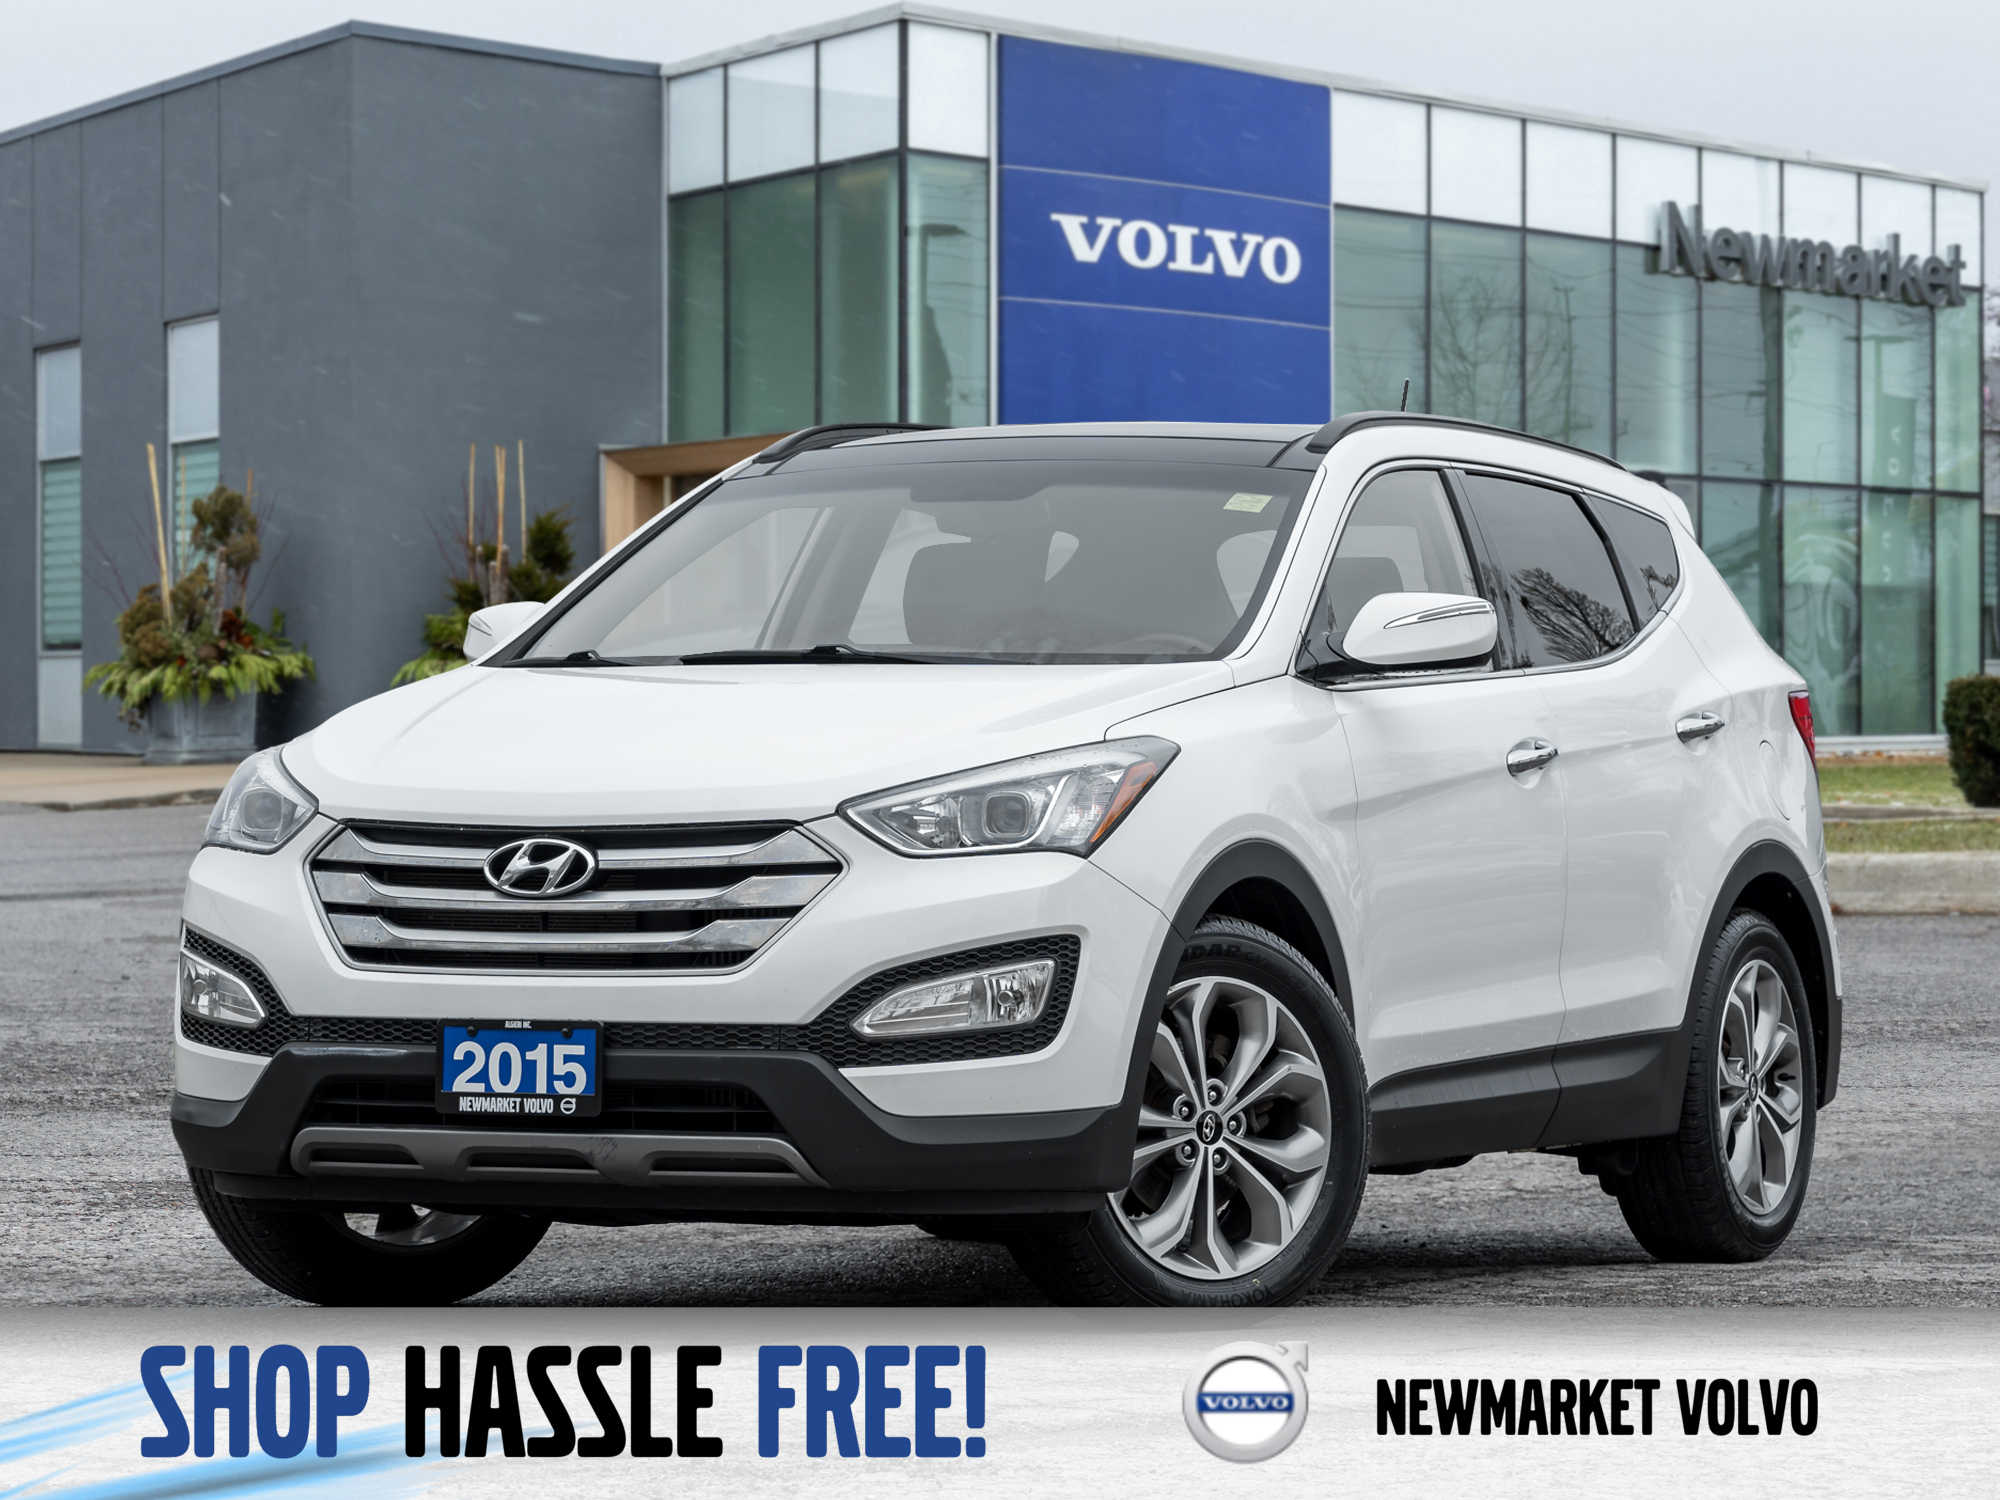 2015 Hyundai Santa Fe Sport AWD 4dr 2.0T SE NEW TIRES ONE OWNER NO ACCIDENTS